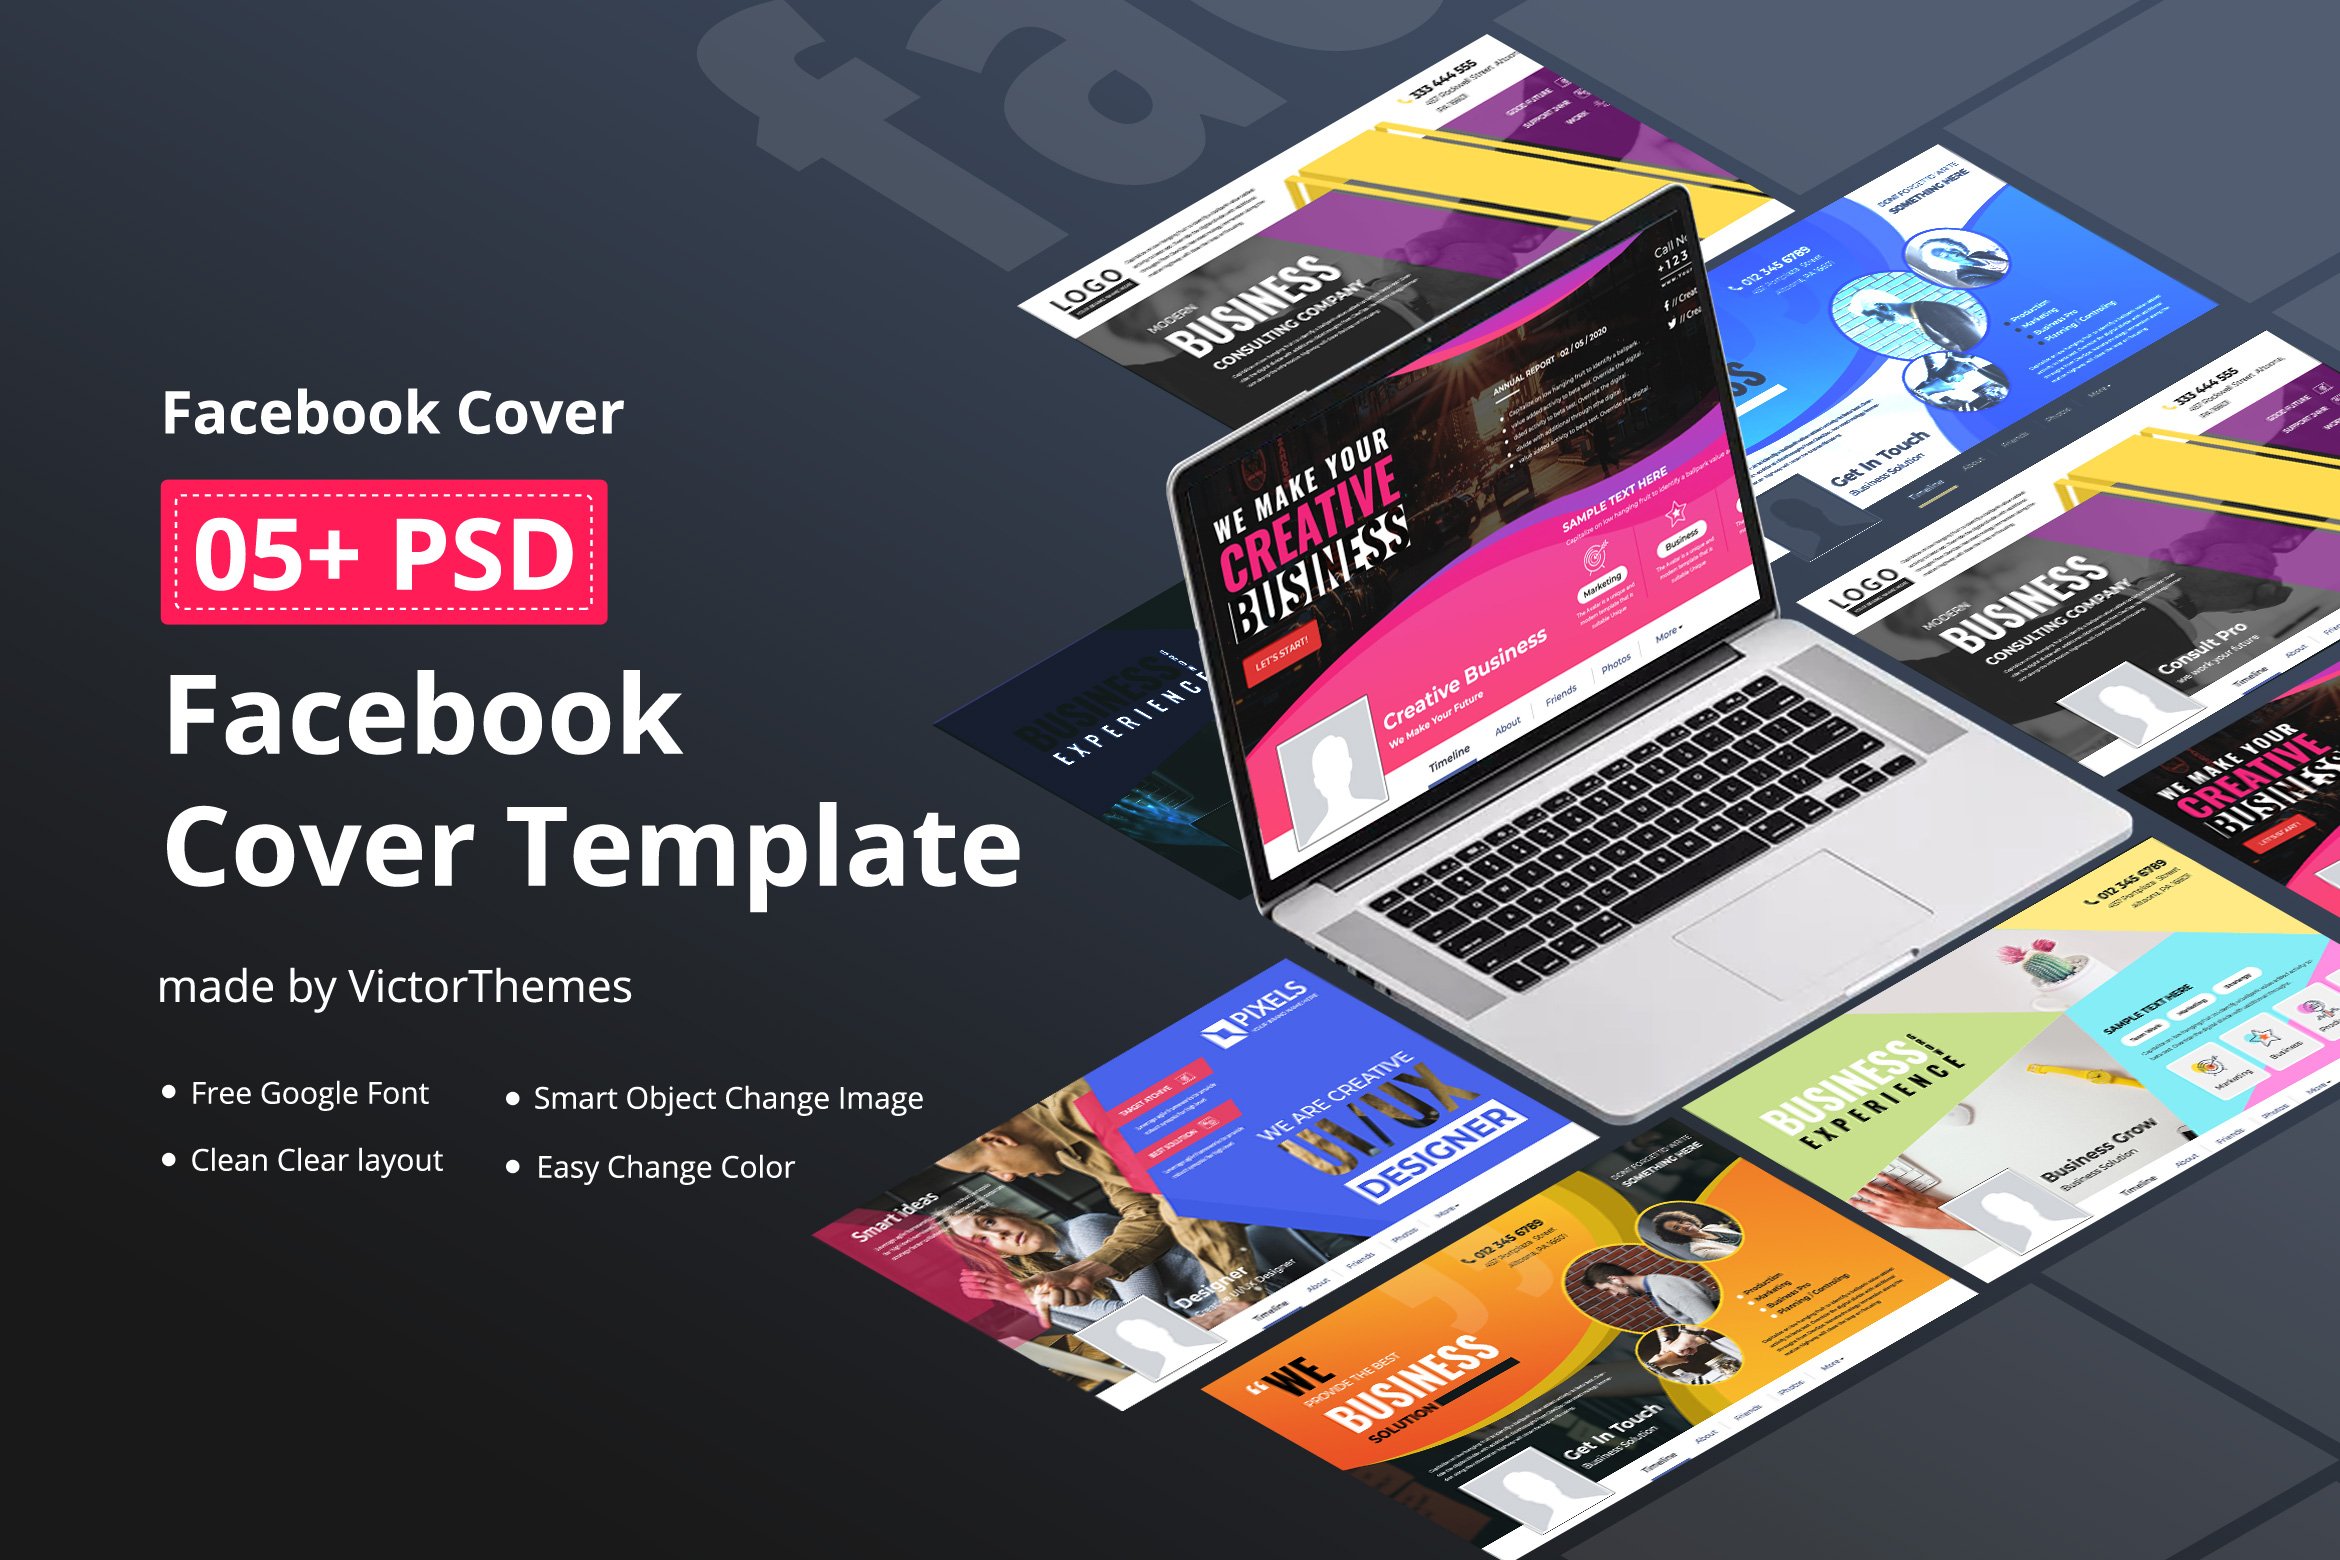 Facebook Business Cover Template